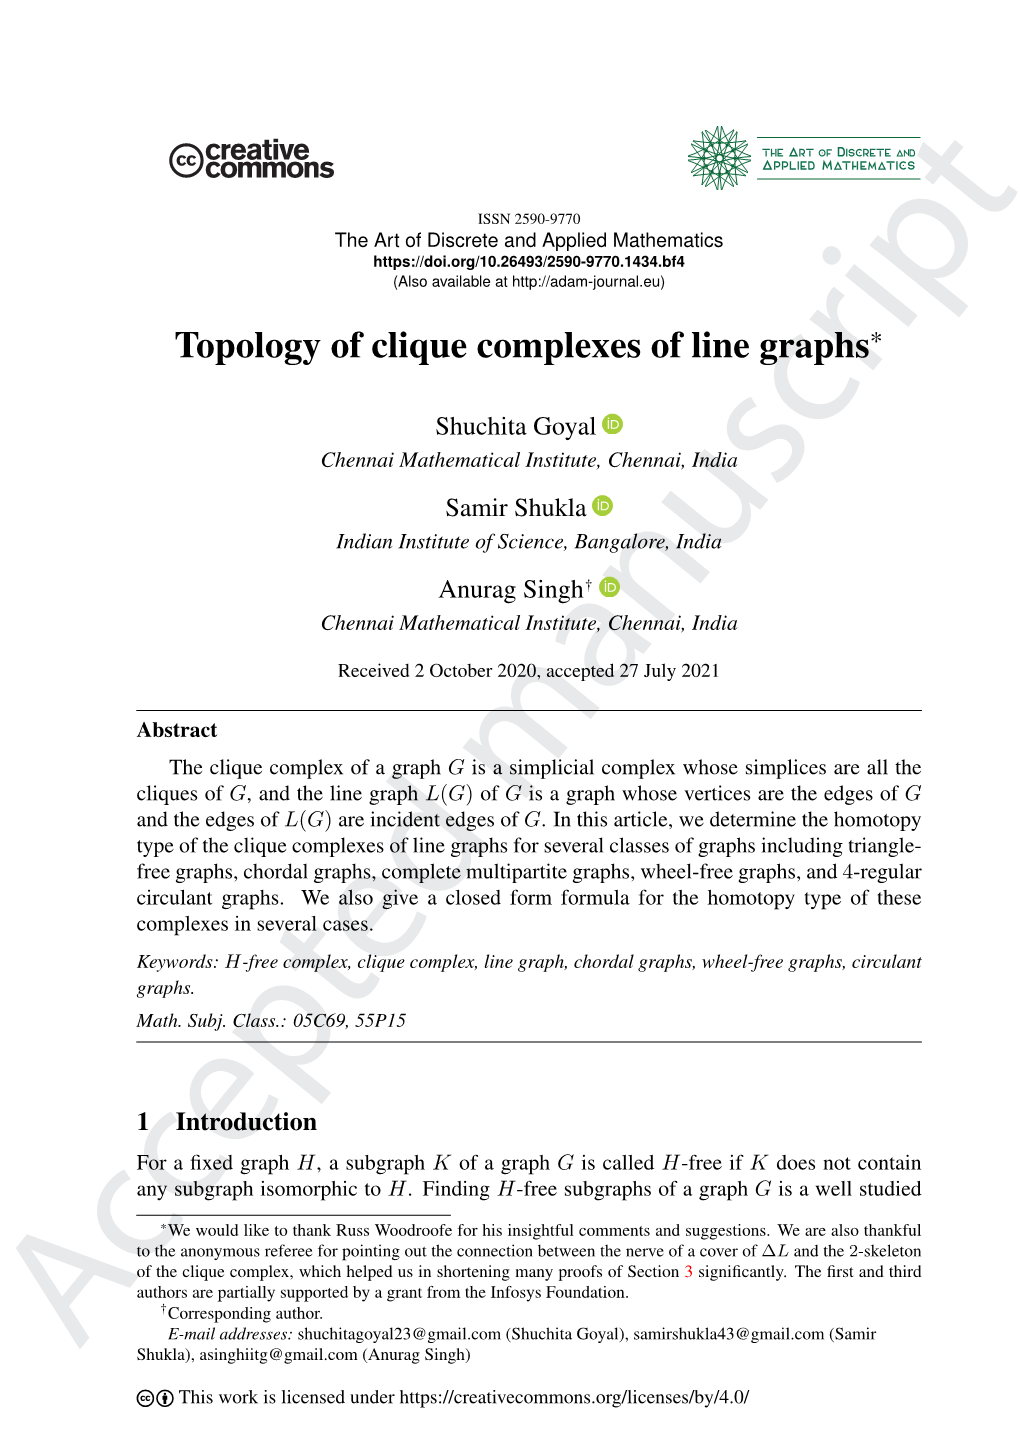 Topology of Clique Complexes of Line Graphs*